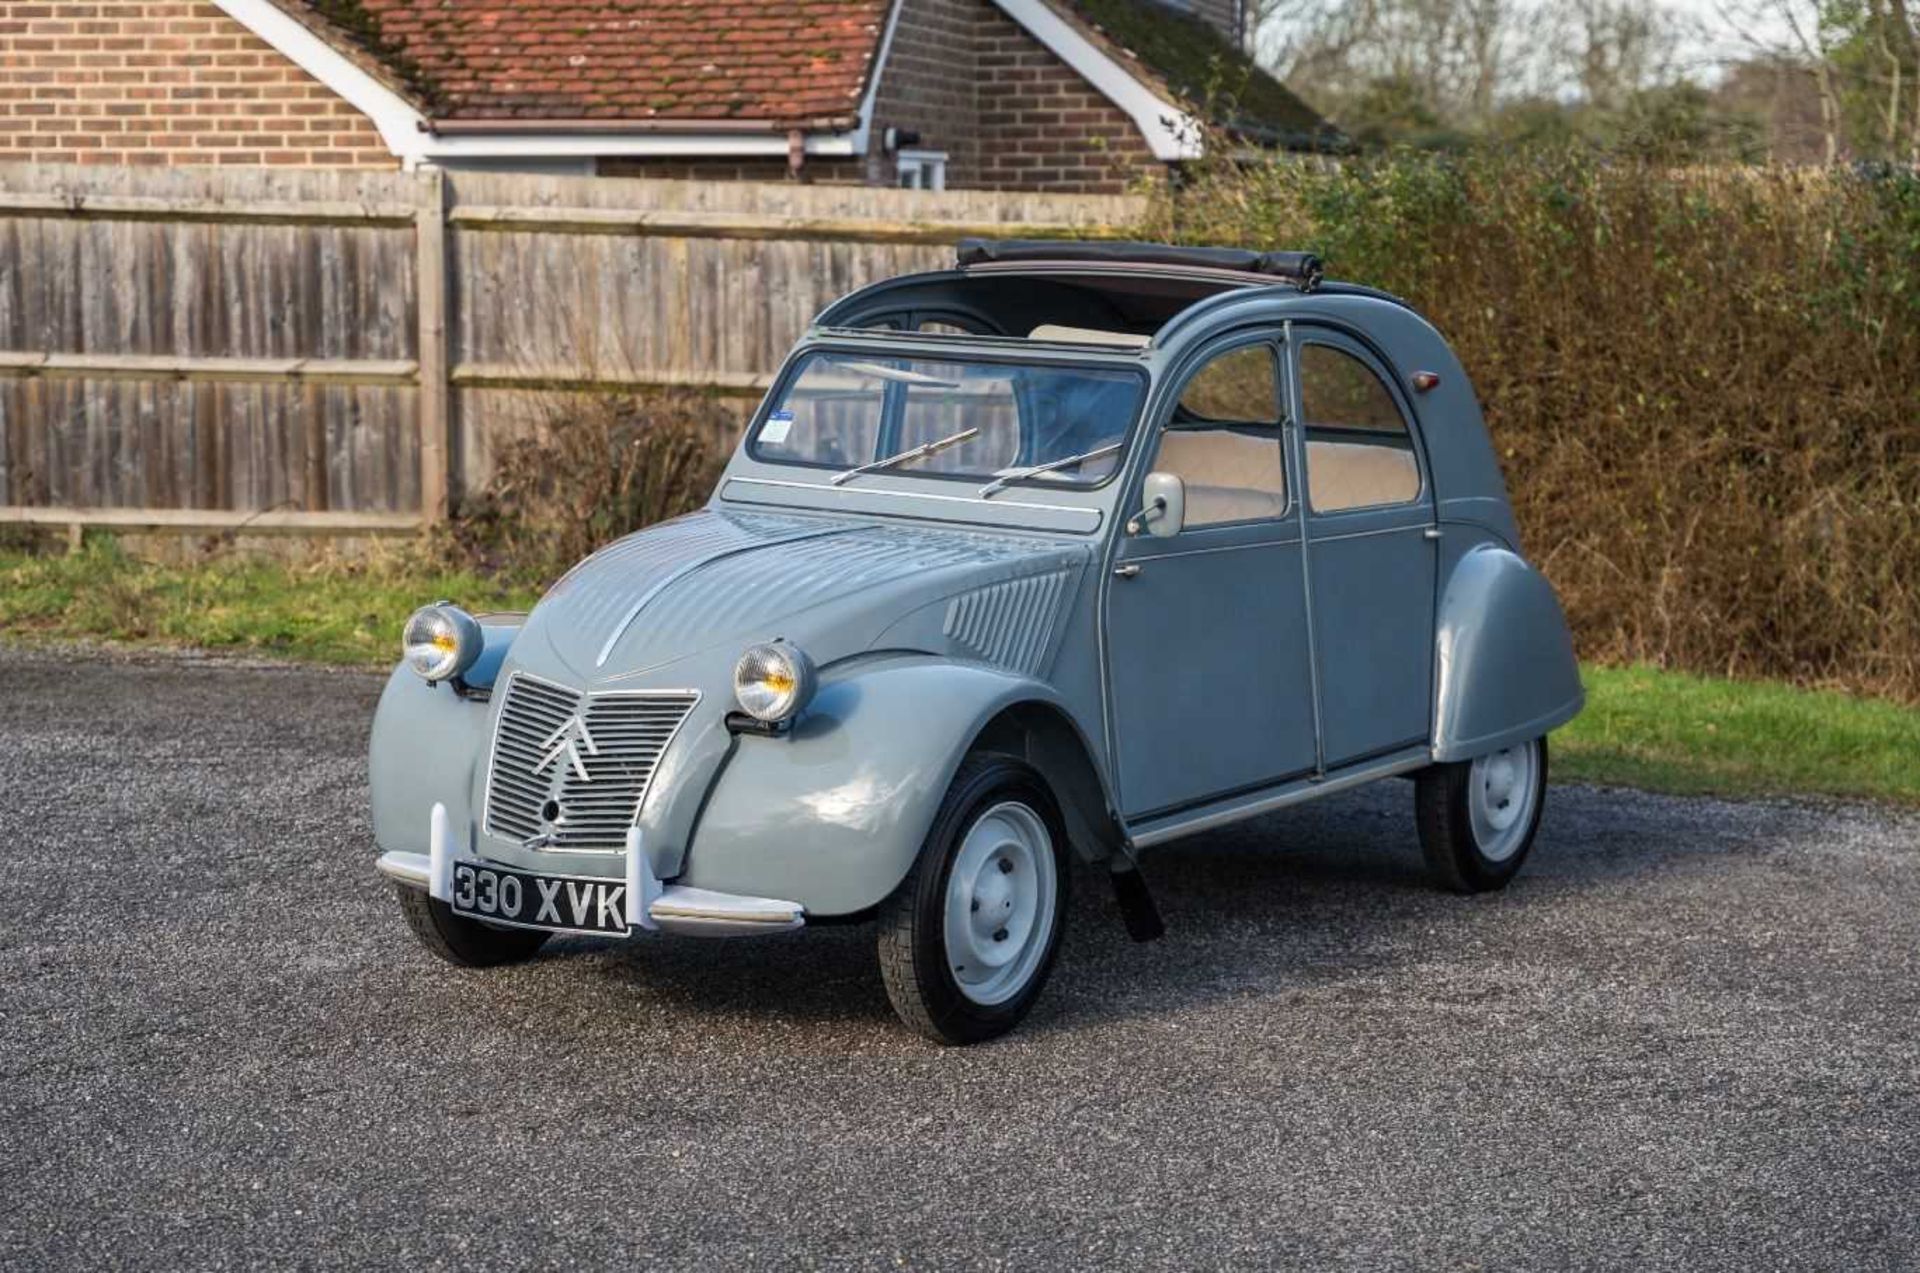 1958 Citroën 2CV AZL A rare, early example, with sought-after 'ripple bonnet' - Image 4 of 77